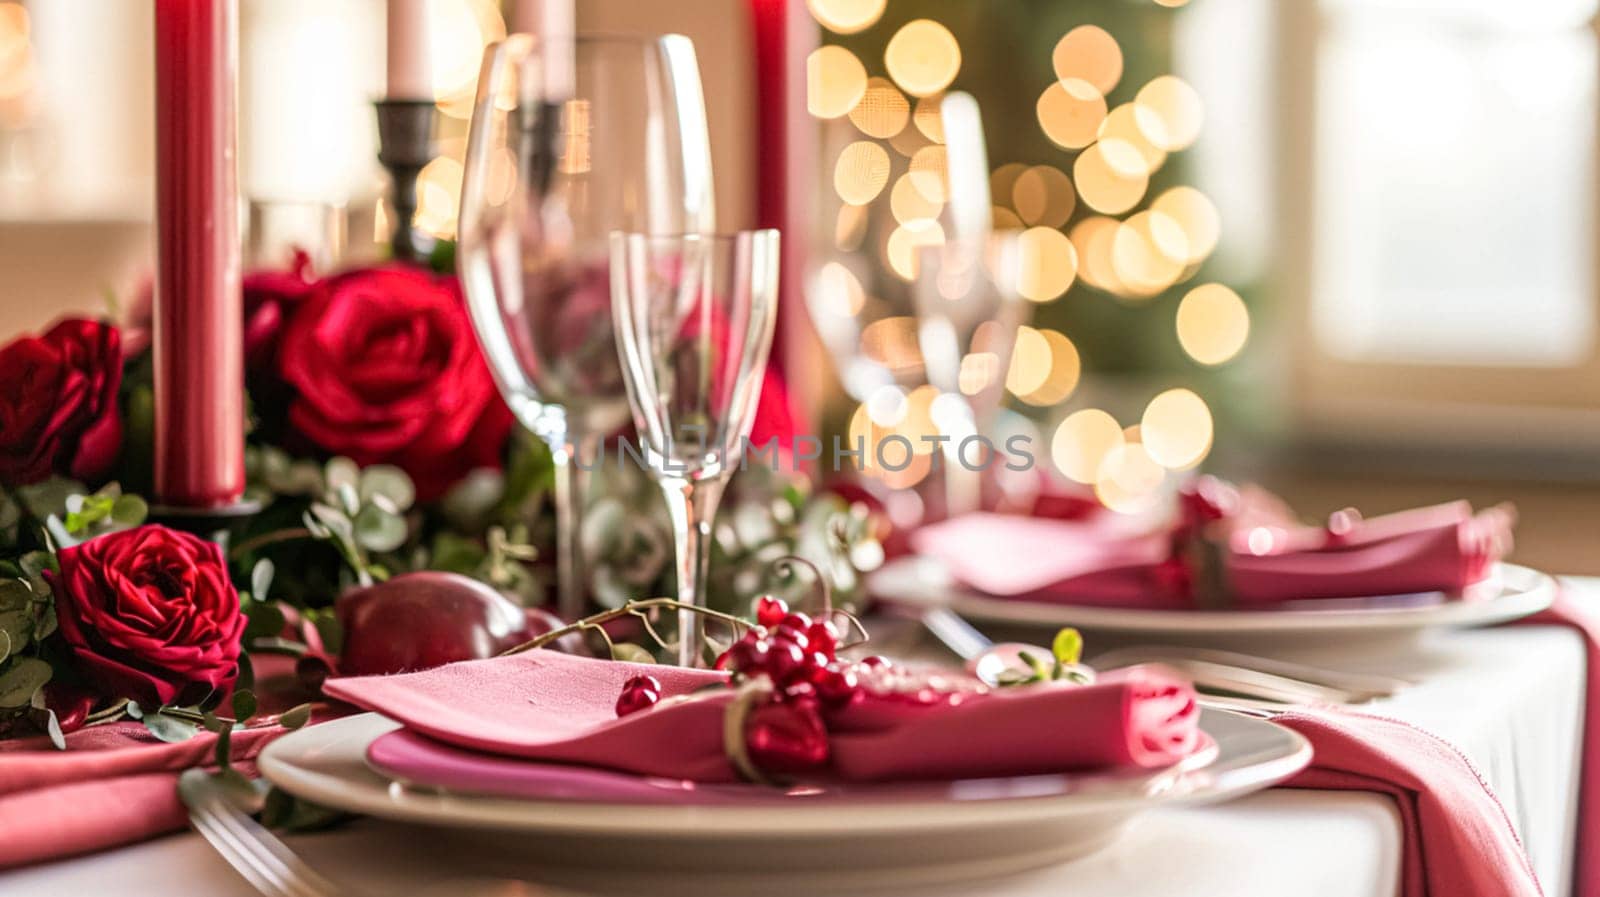 Festive table setting with cutlery, candles and beautiful red flowers in vase by Olayola